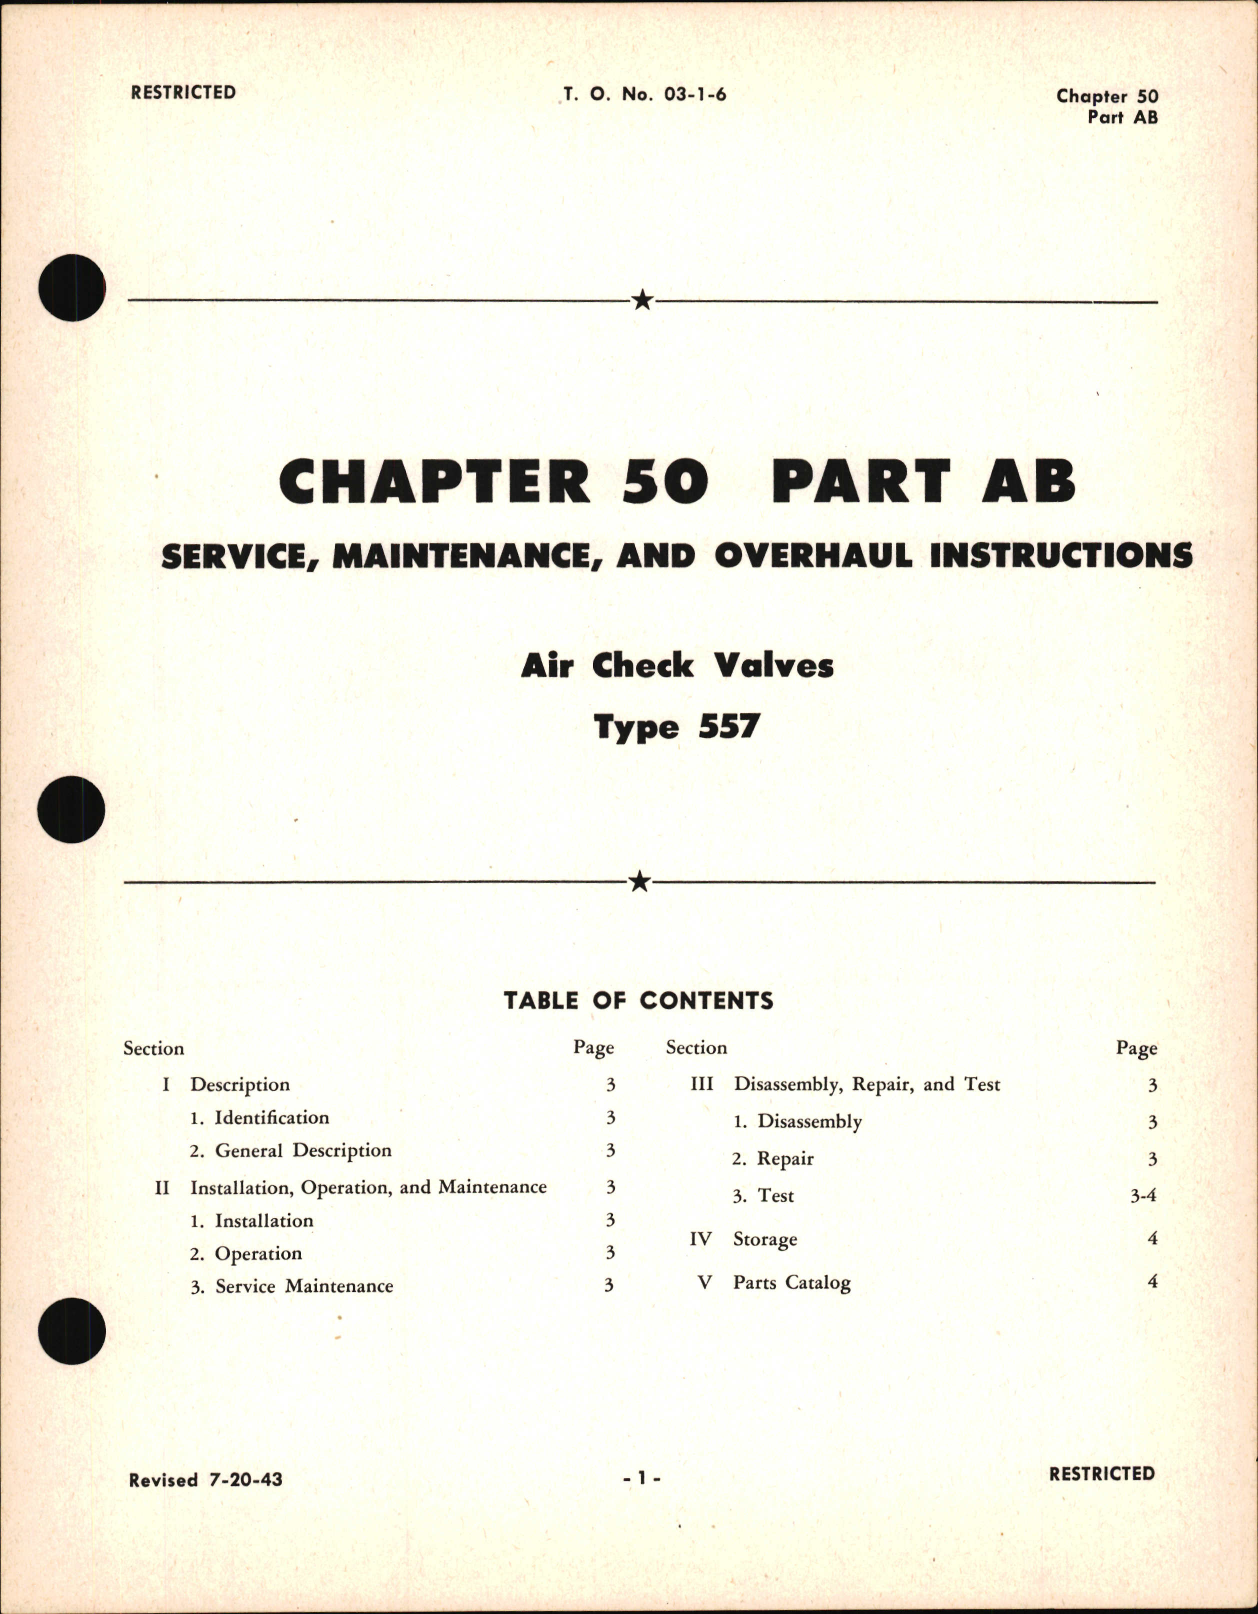 Sample page 1 from AirCorps Library document: Service, Maintenance & Overhaul Instructions for Air Check Valves, Chapter 50 Part AB